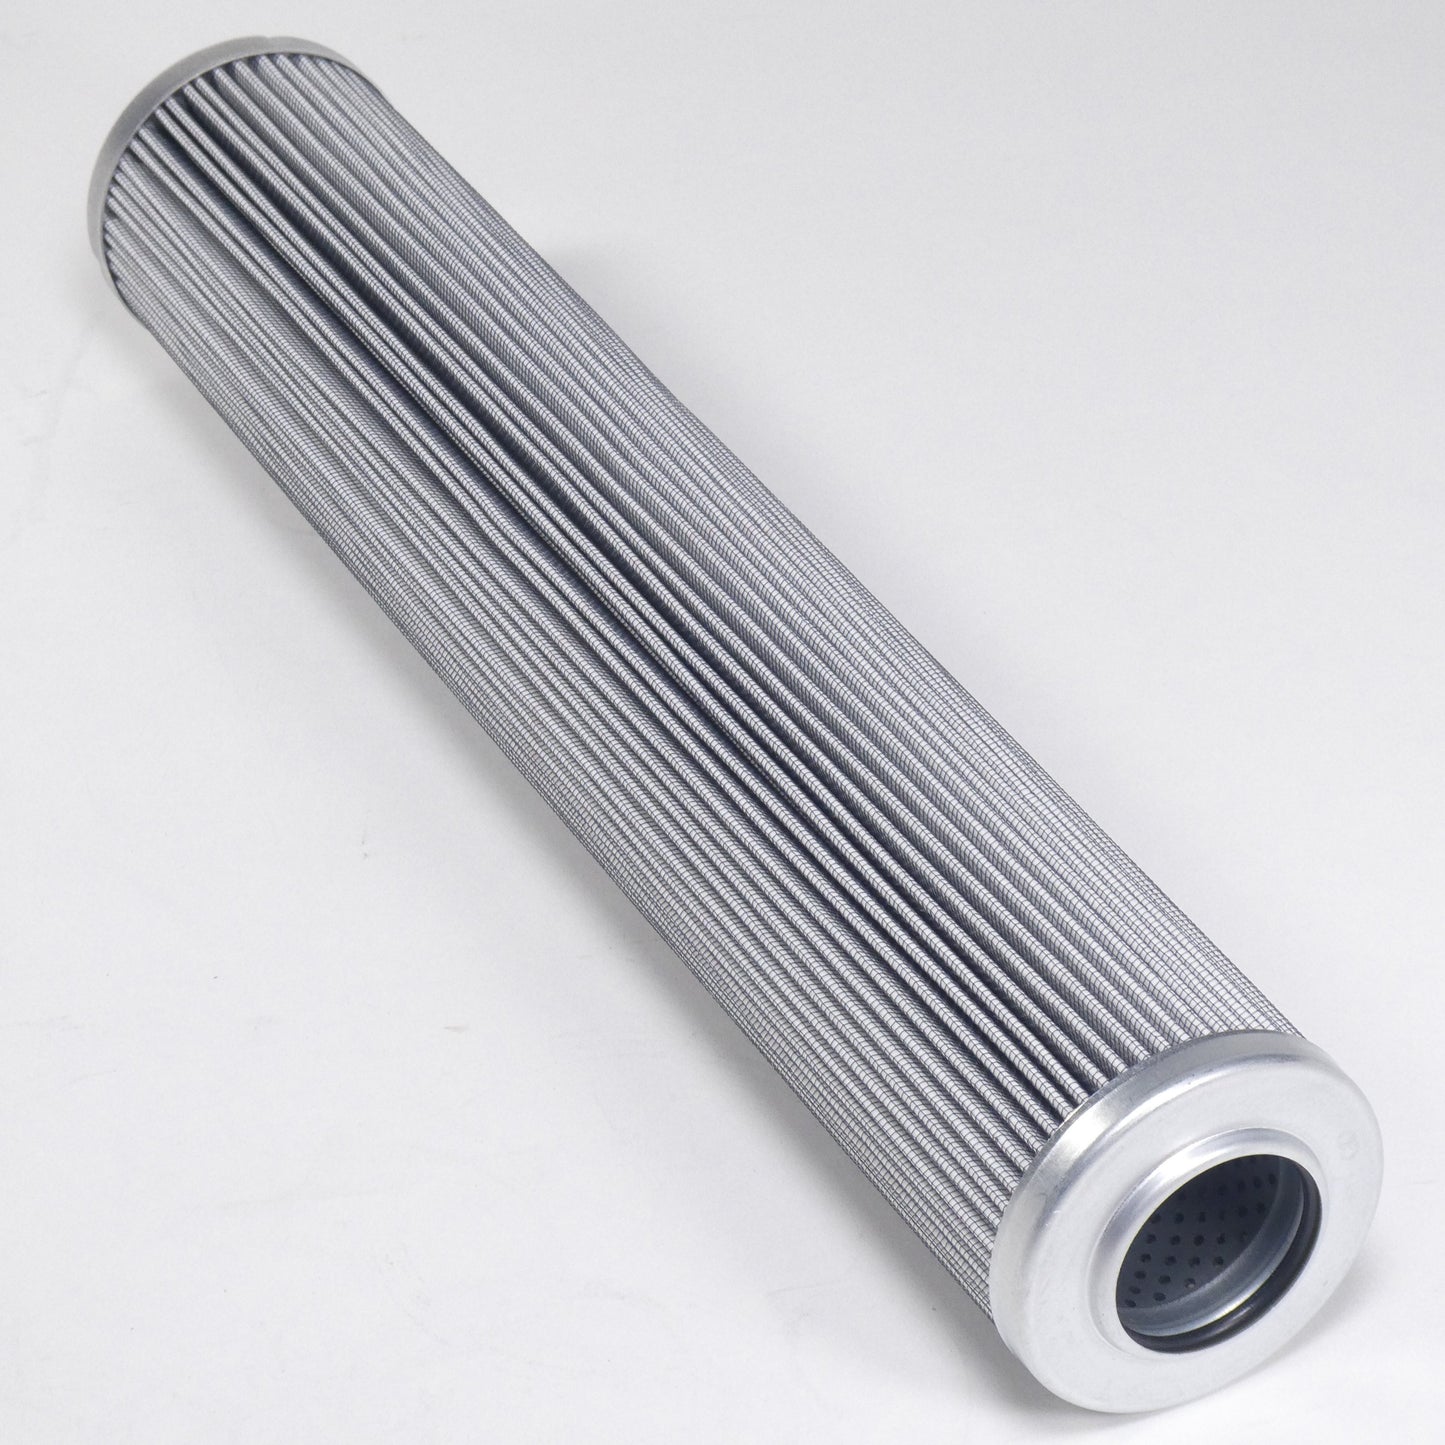 Hydrafil Replacement Filter Element for Pall HC9600FKT16H